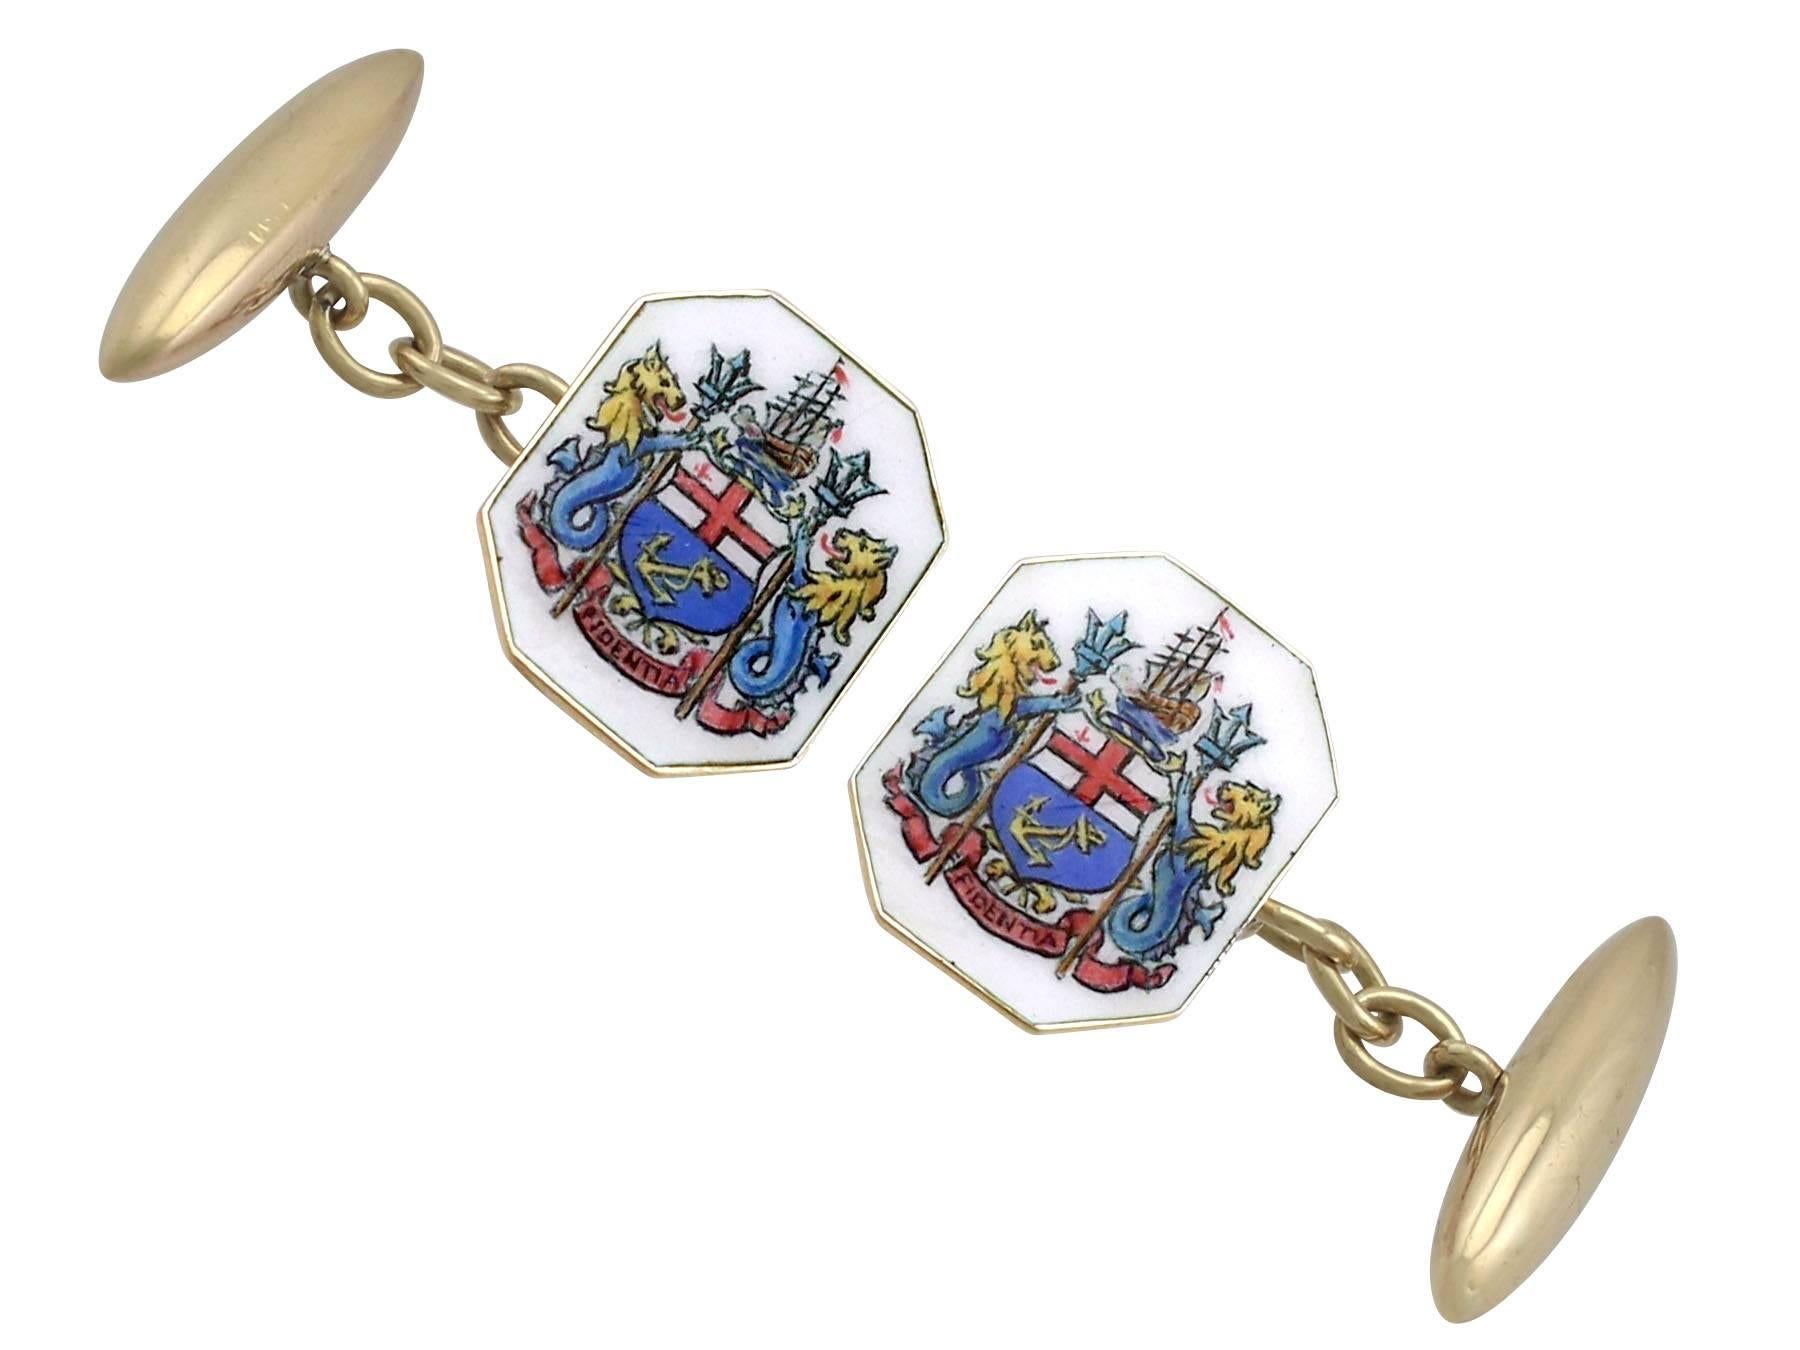 An impressive pair of antique hand painted enamel and 18 karat yellow gold cufflinks; part of our diverse antique jewelry and estate jewelry collections

These fine and impressive antique enamel cufflinks have been crafted in 18k yellow gold.

The